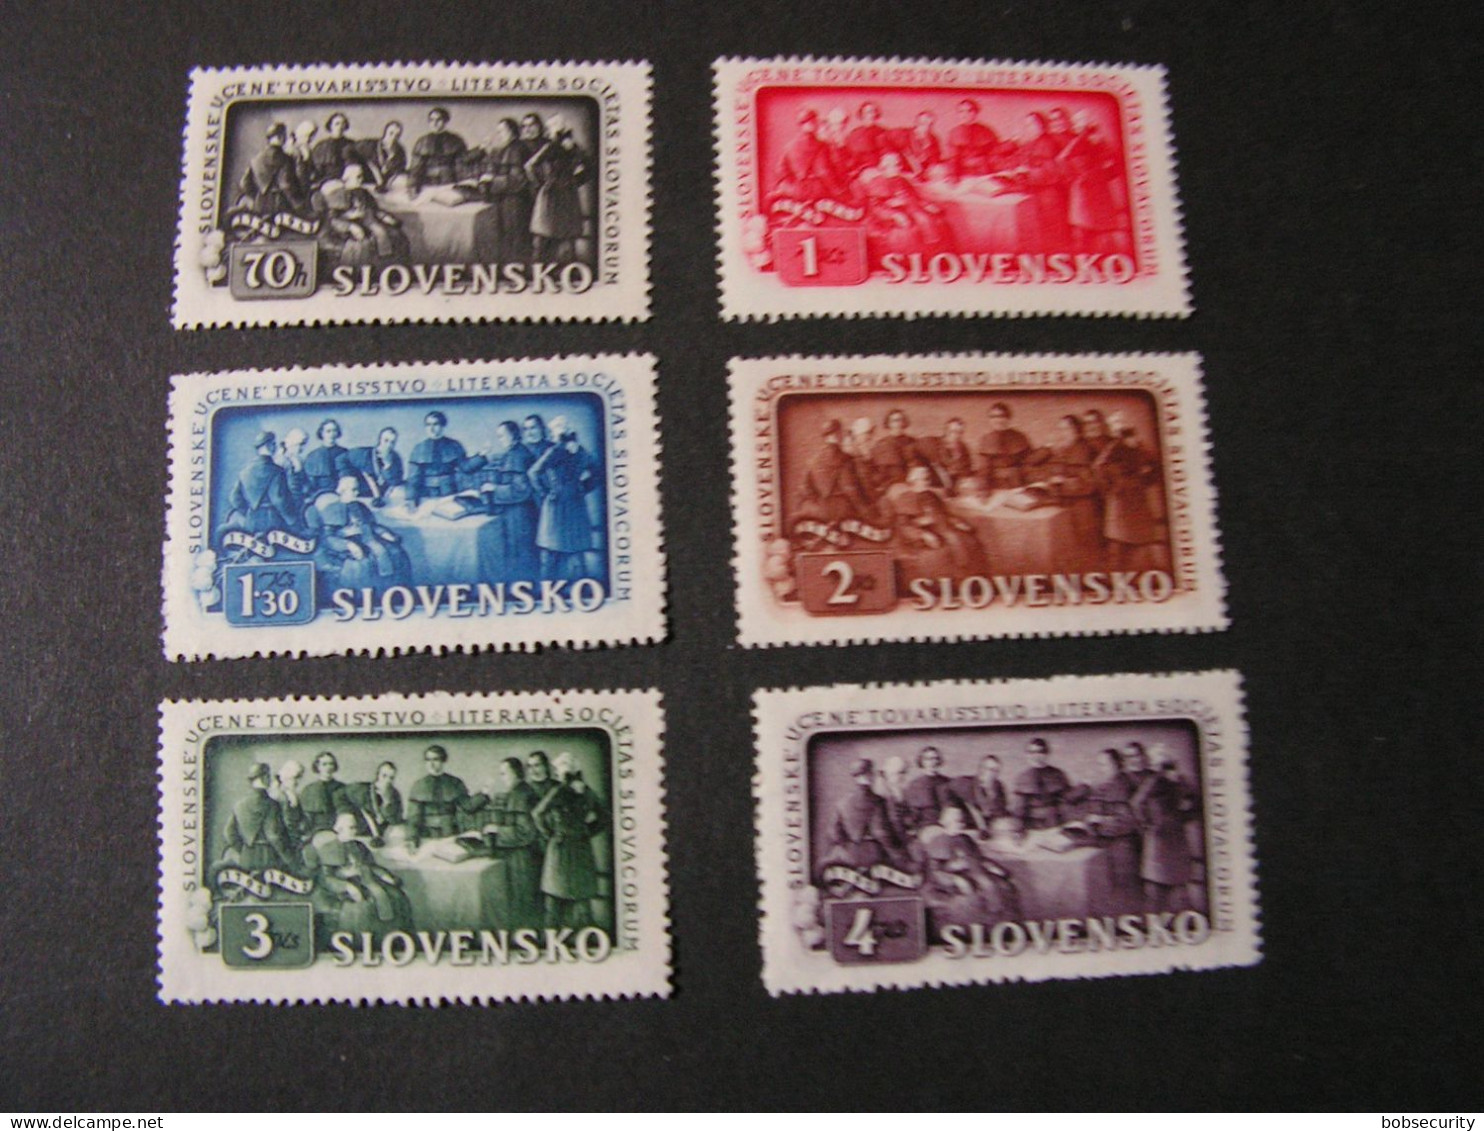 SK 1943  Lot   ** MNH  , One Stamp Not Perffect - Neufs